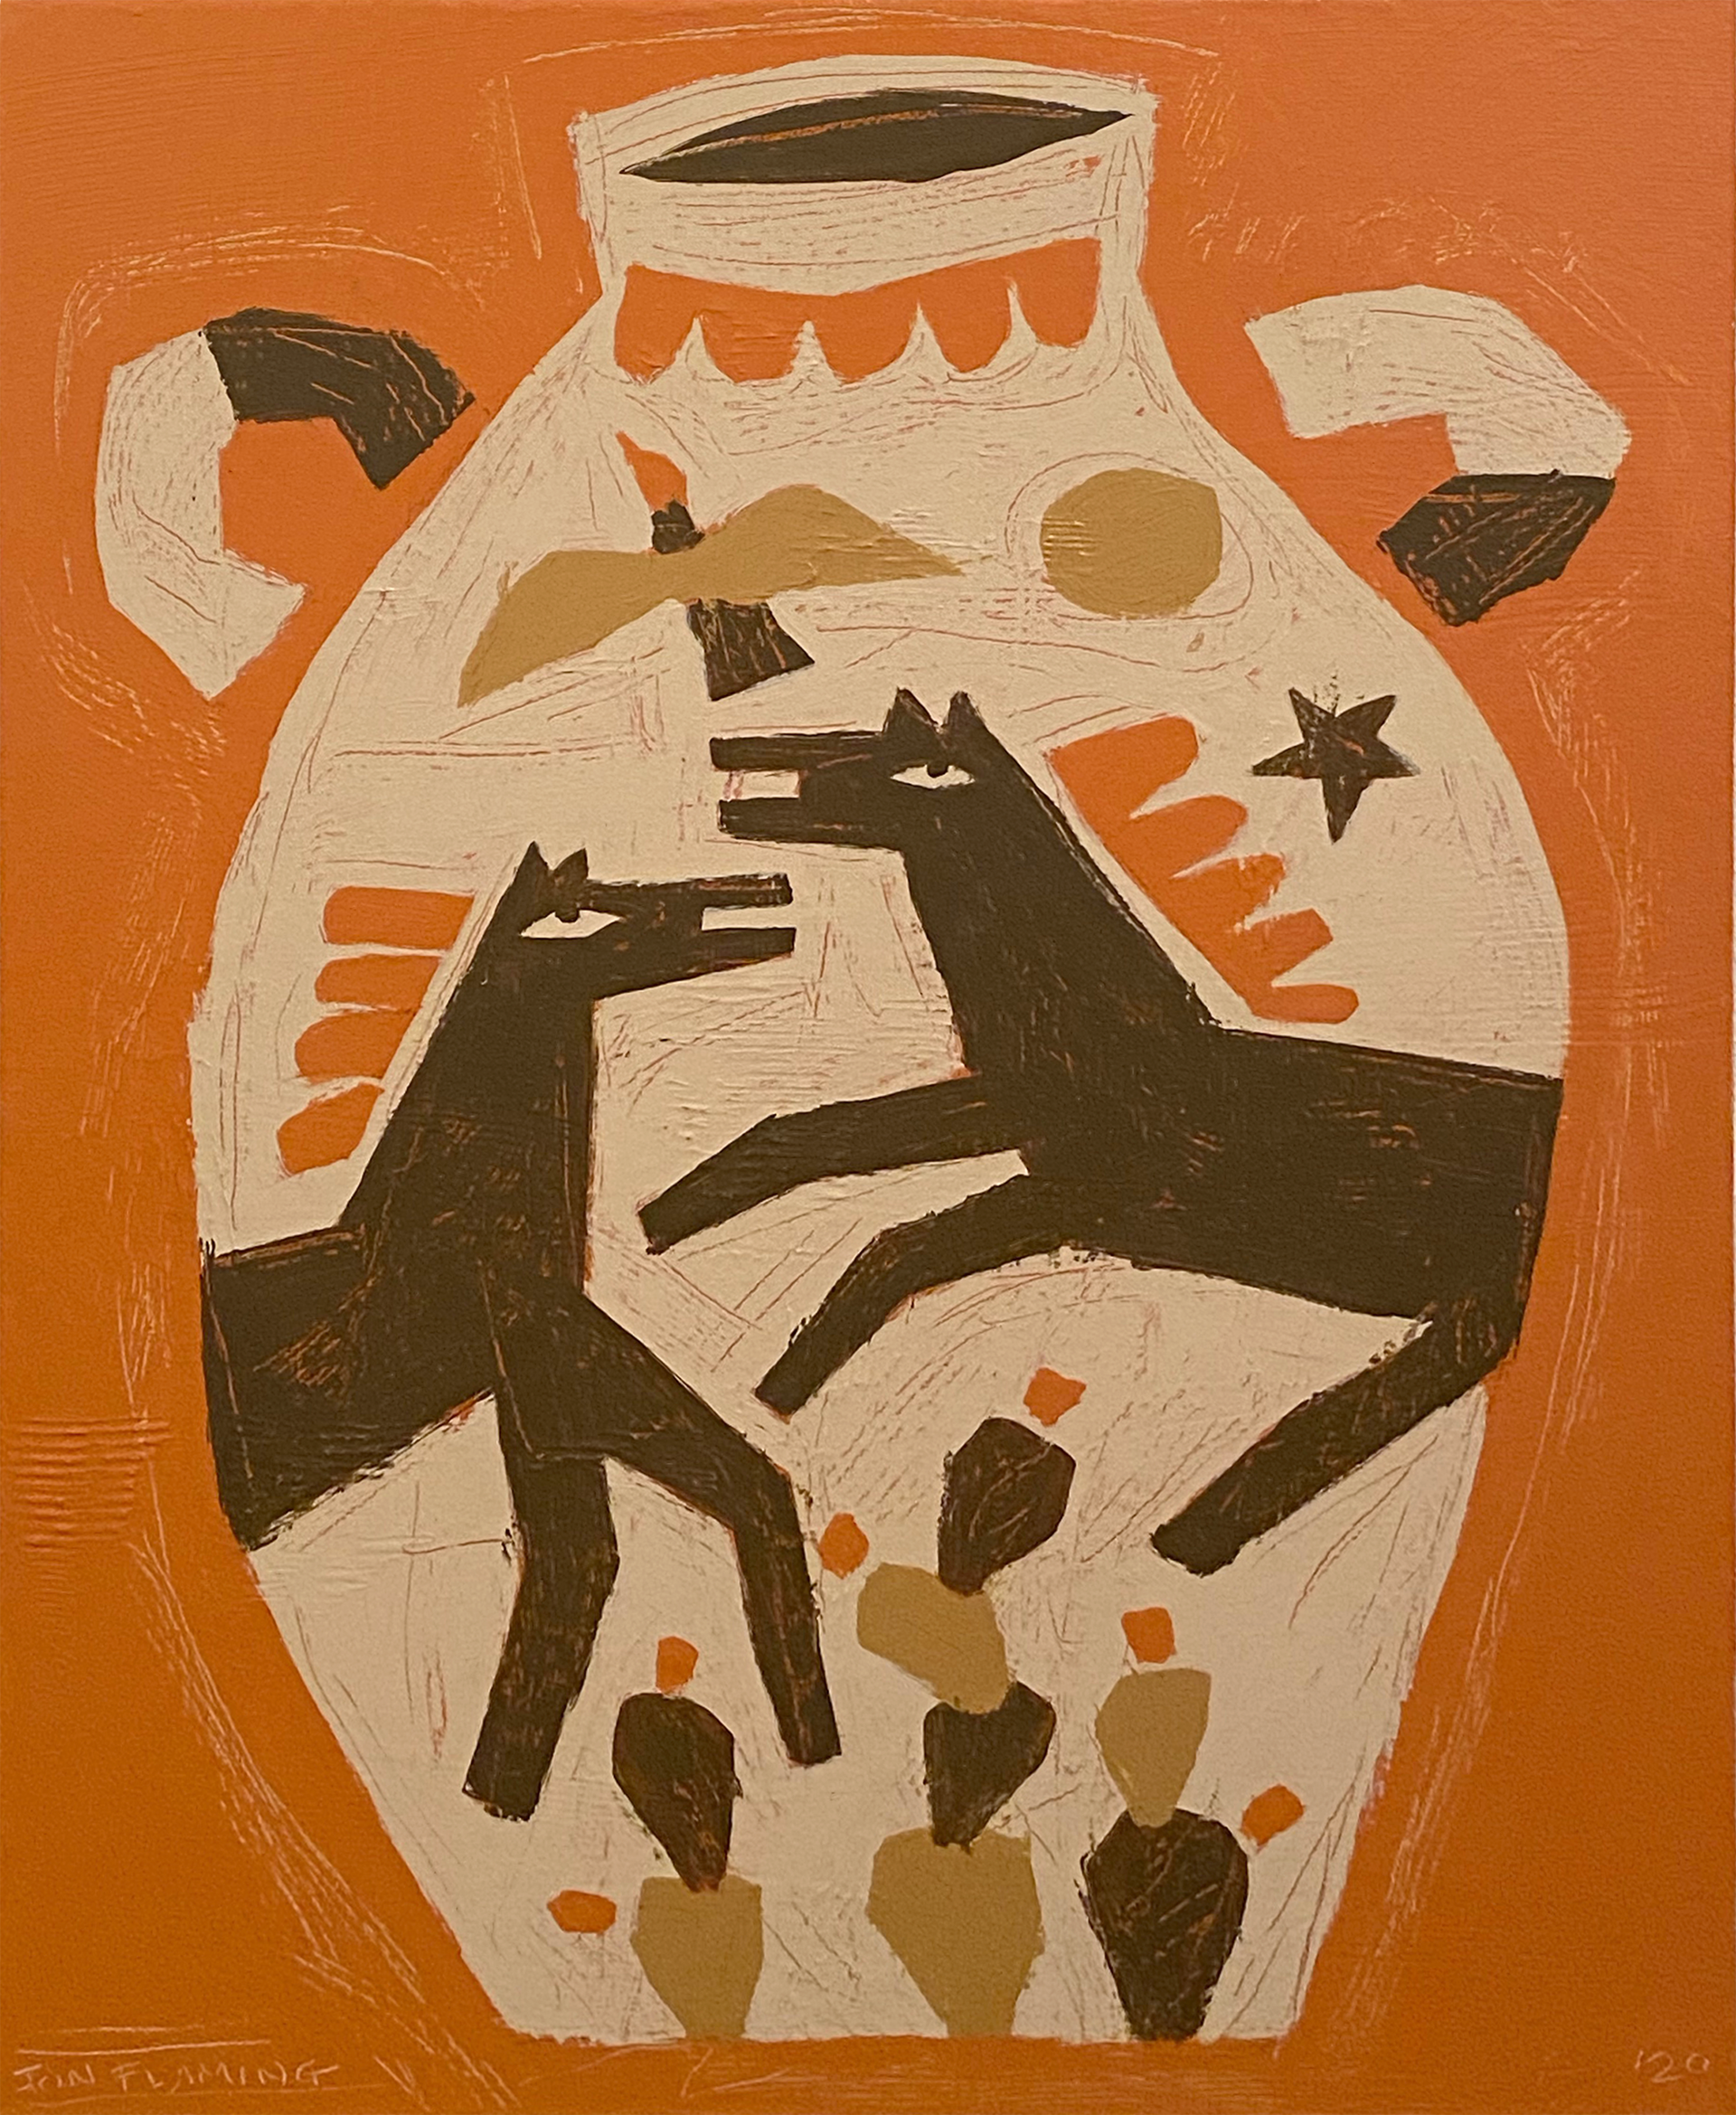 Horses on a Clay Jar by Jon Flaming